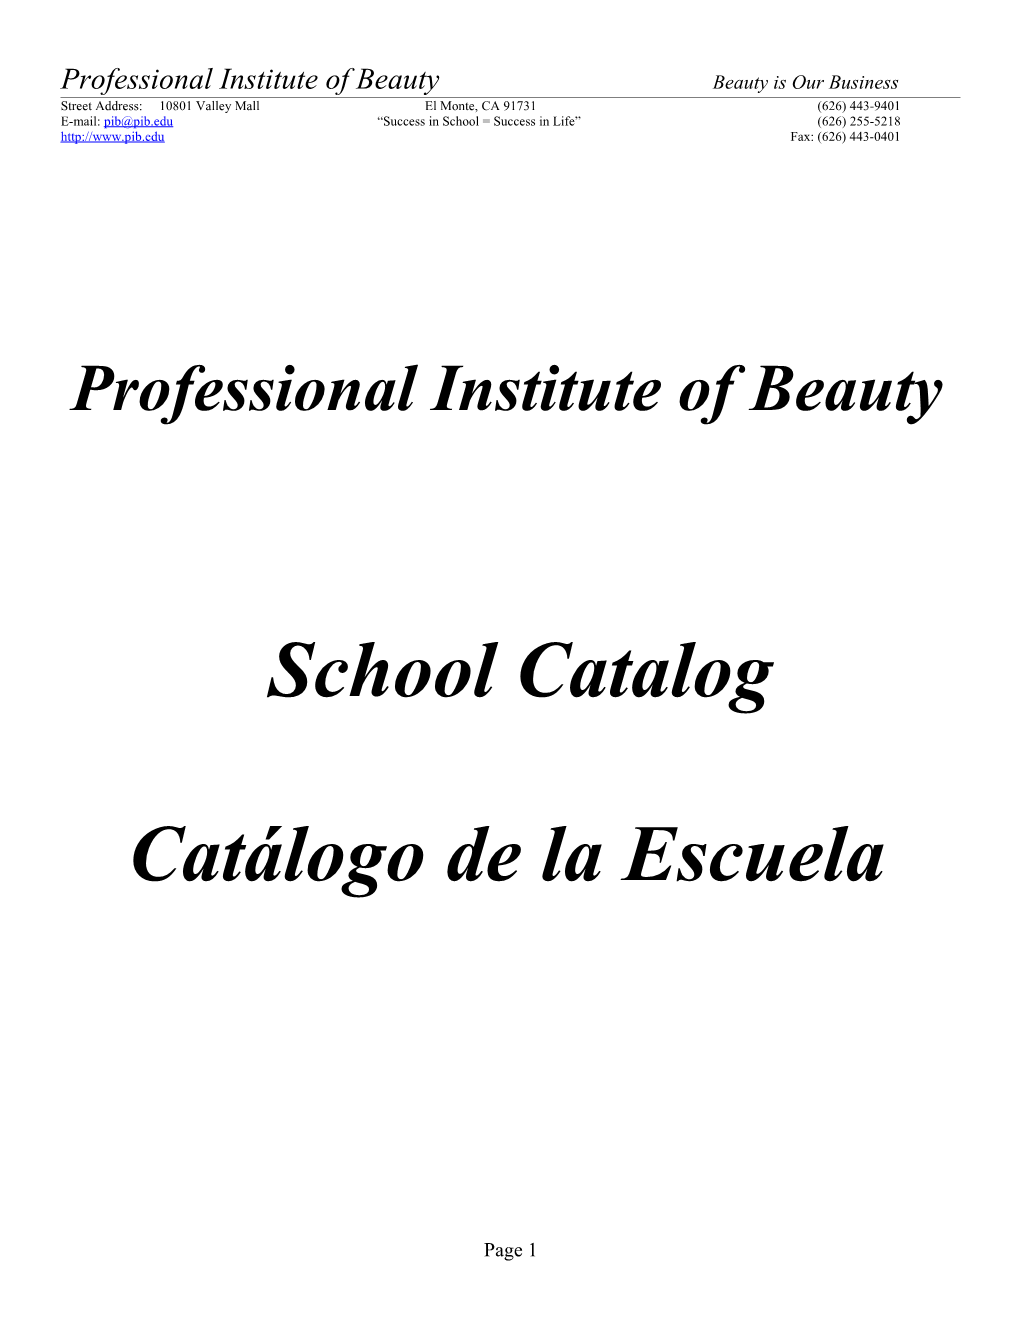 Professional Institute Of Beauty